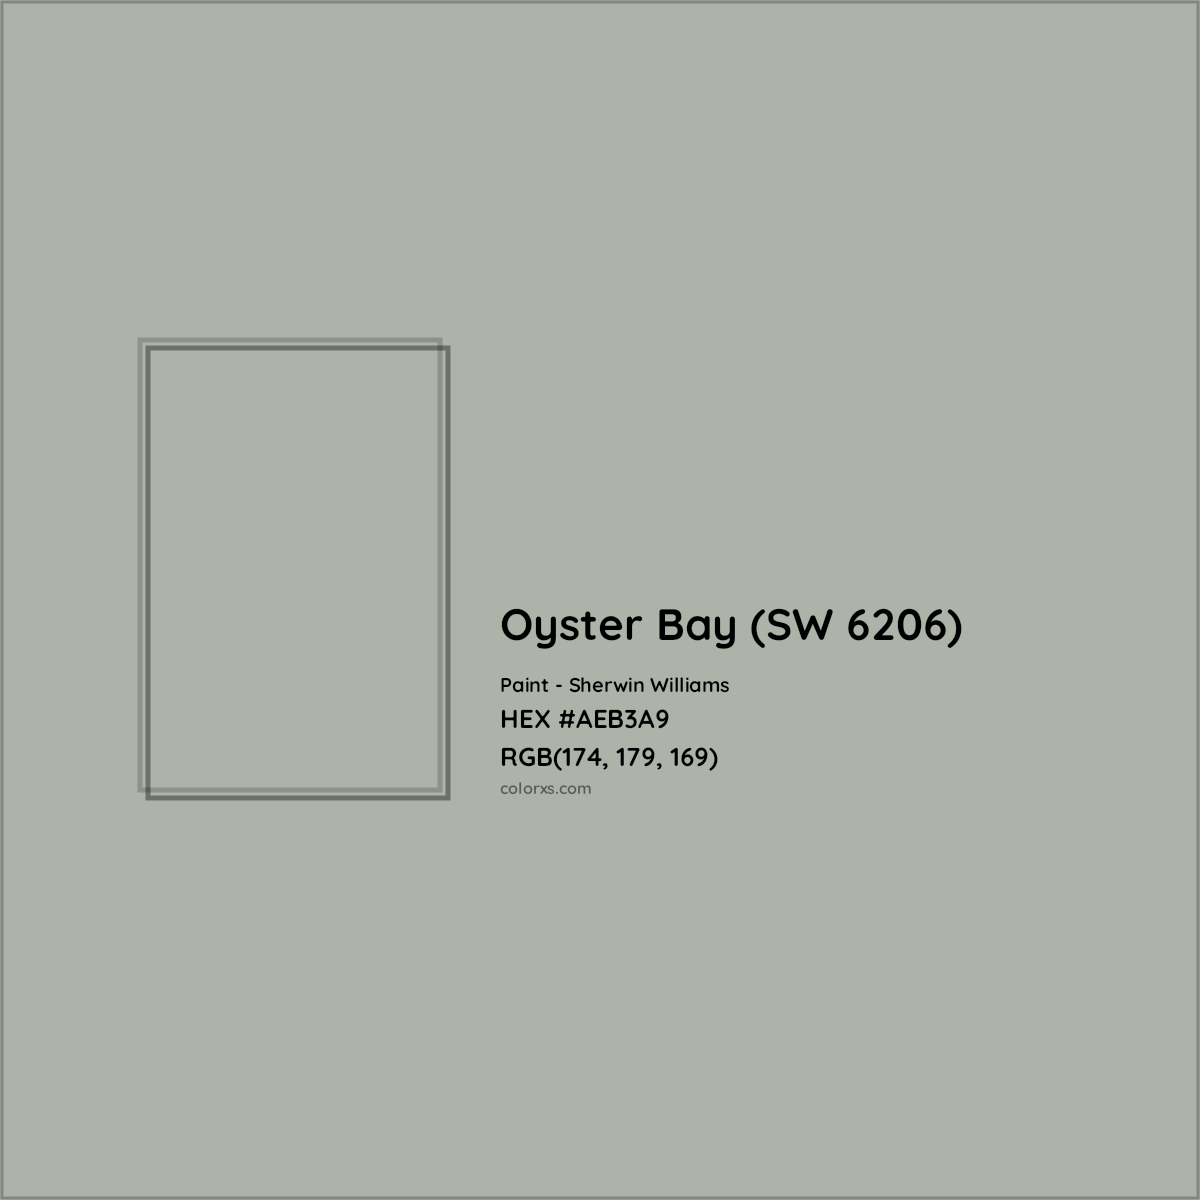 HEX #AEB3A9 Oyster Bay (SW 6206) Paint Sherwin Williams - Color Code